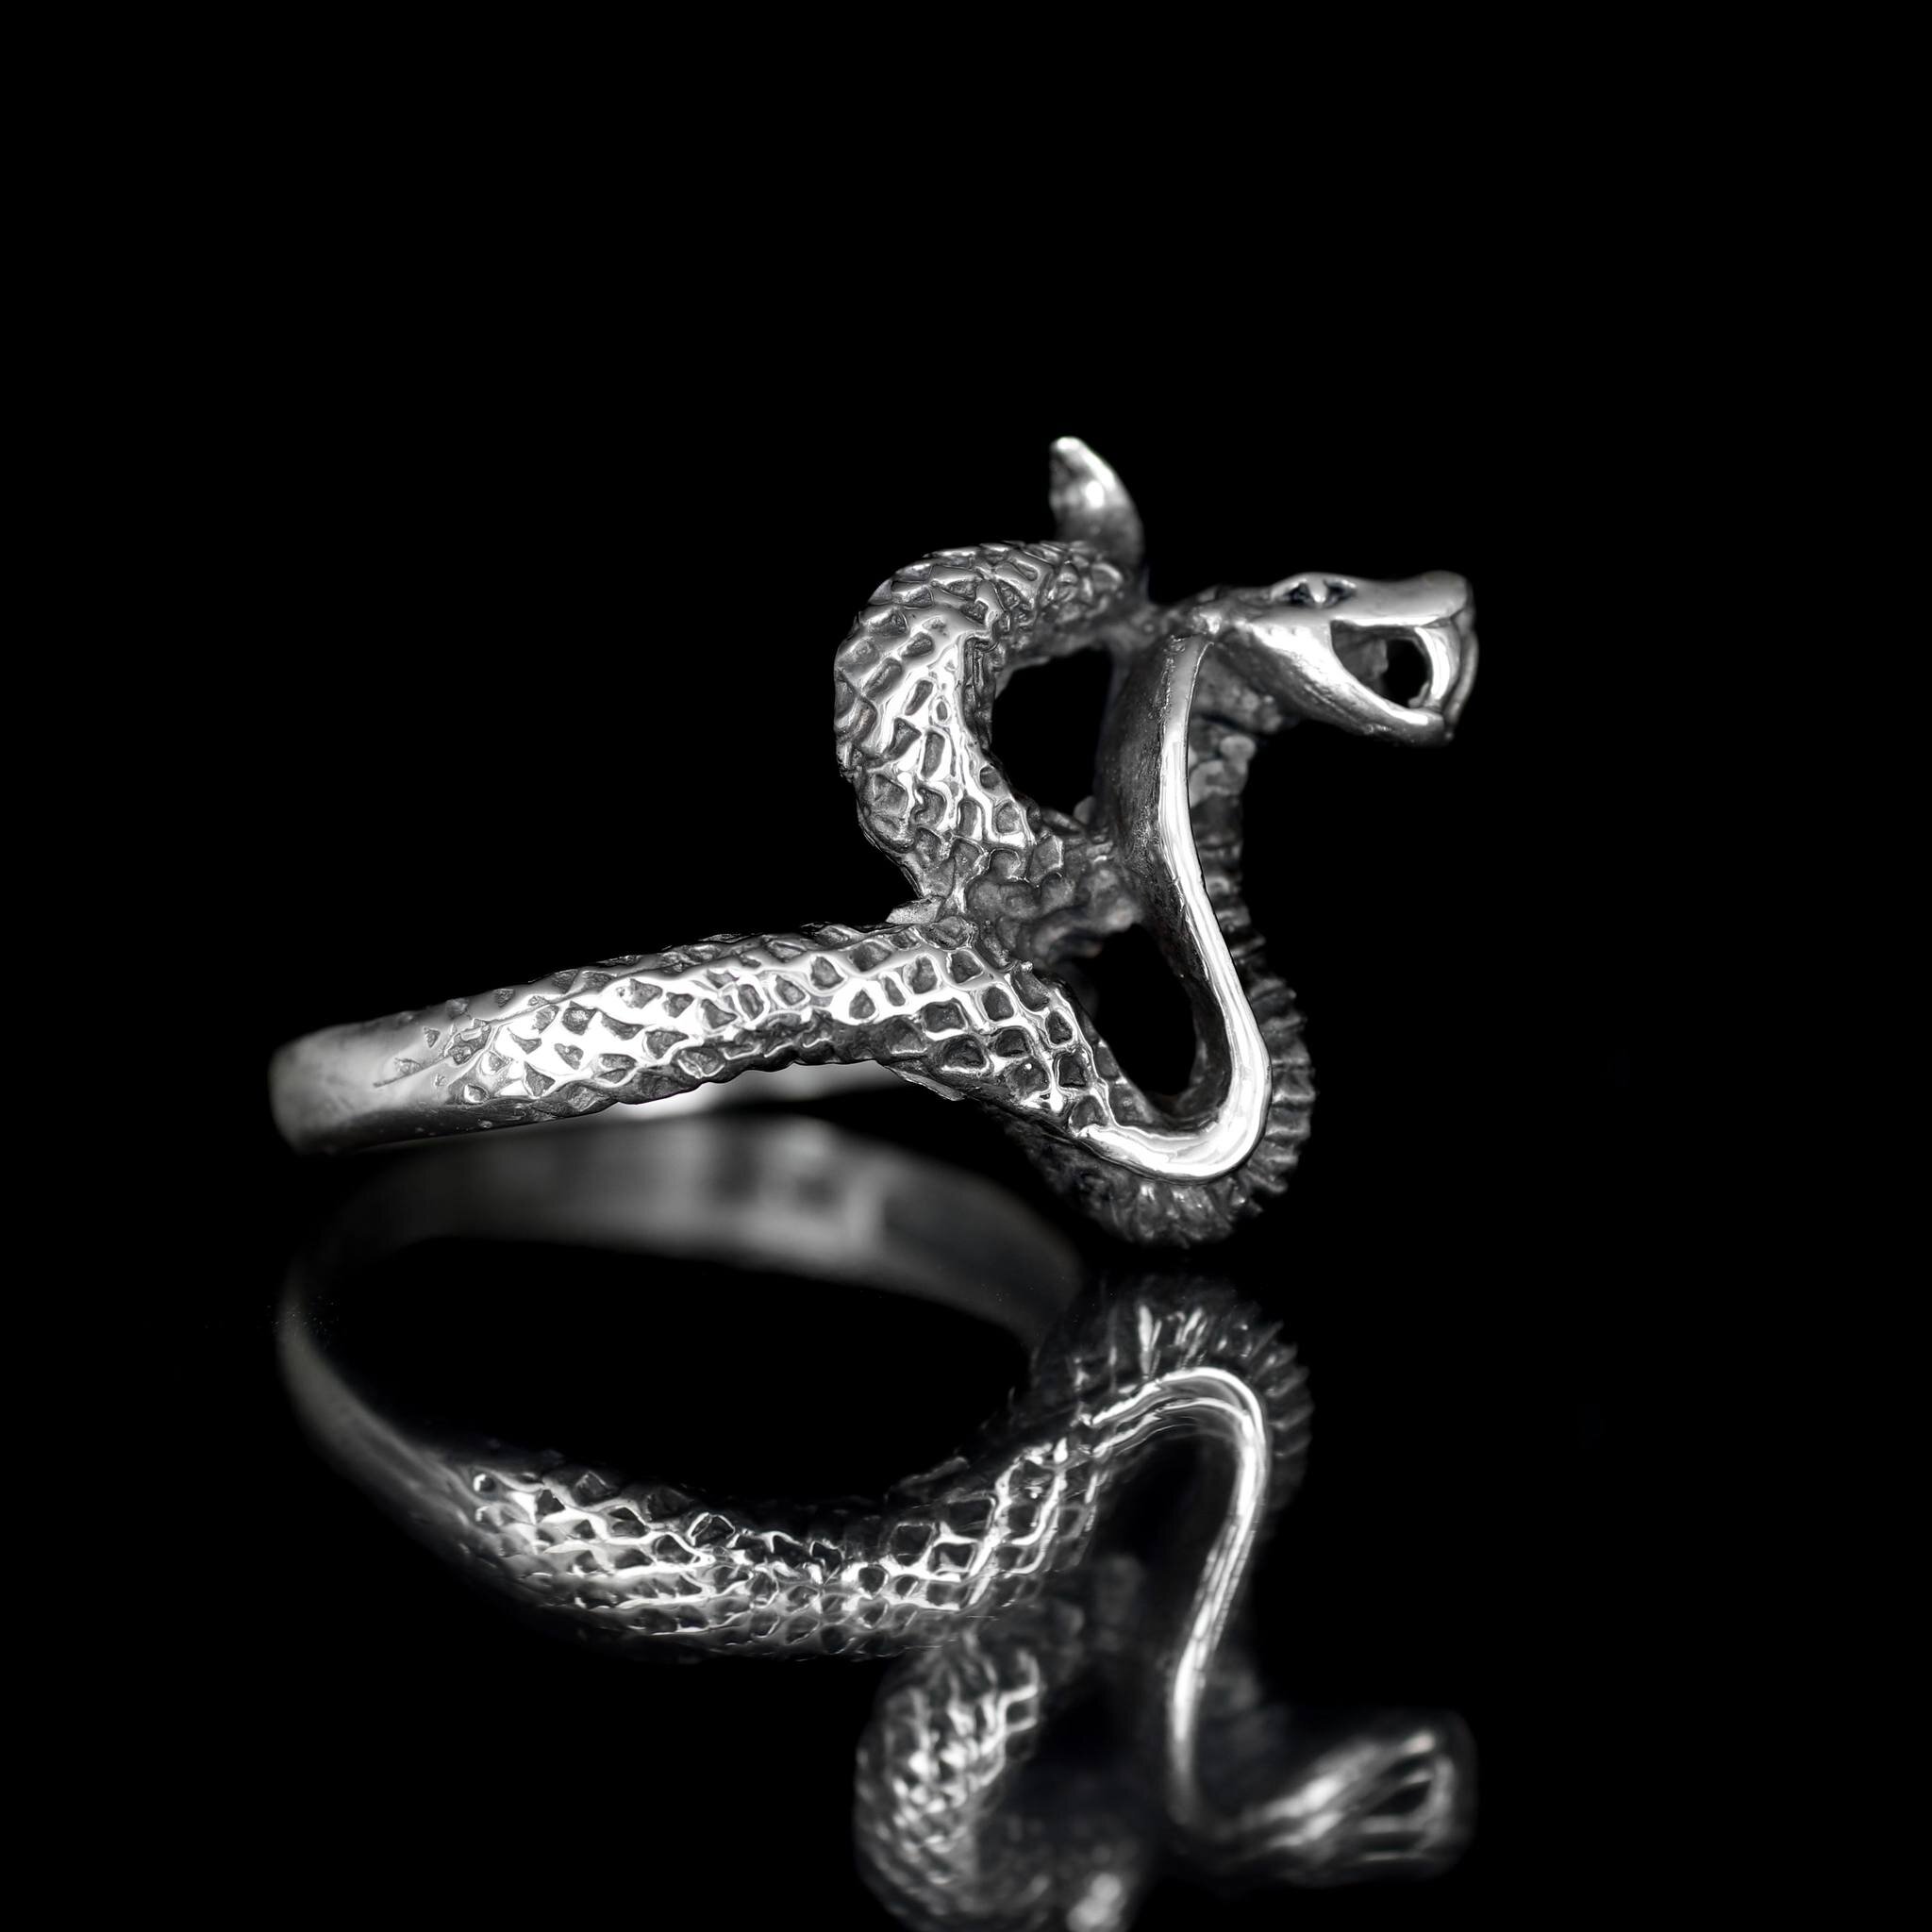 Detailed scales and fangs make for a standout ring without the heft that some of our other statement pieces carry. 
#cobra #snakering #bikerring #silver925